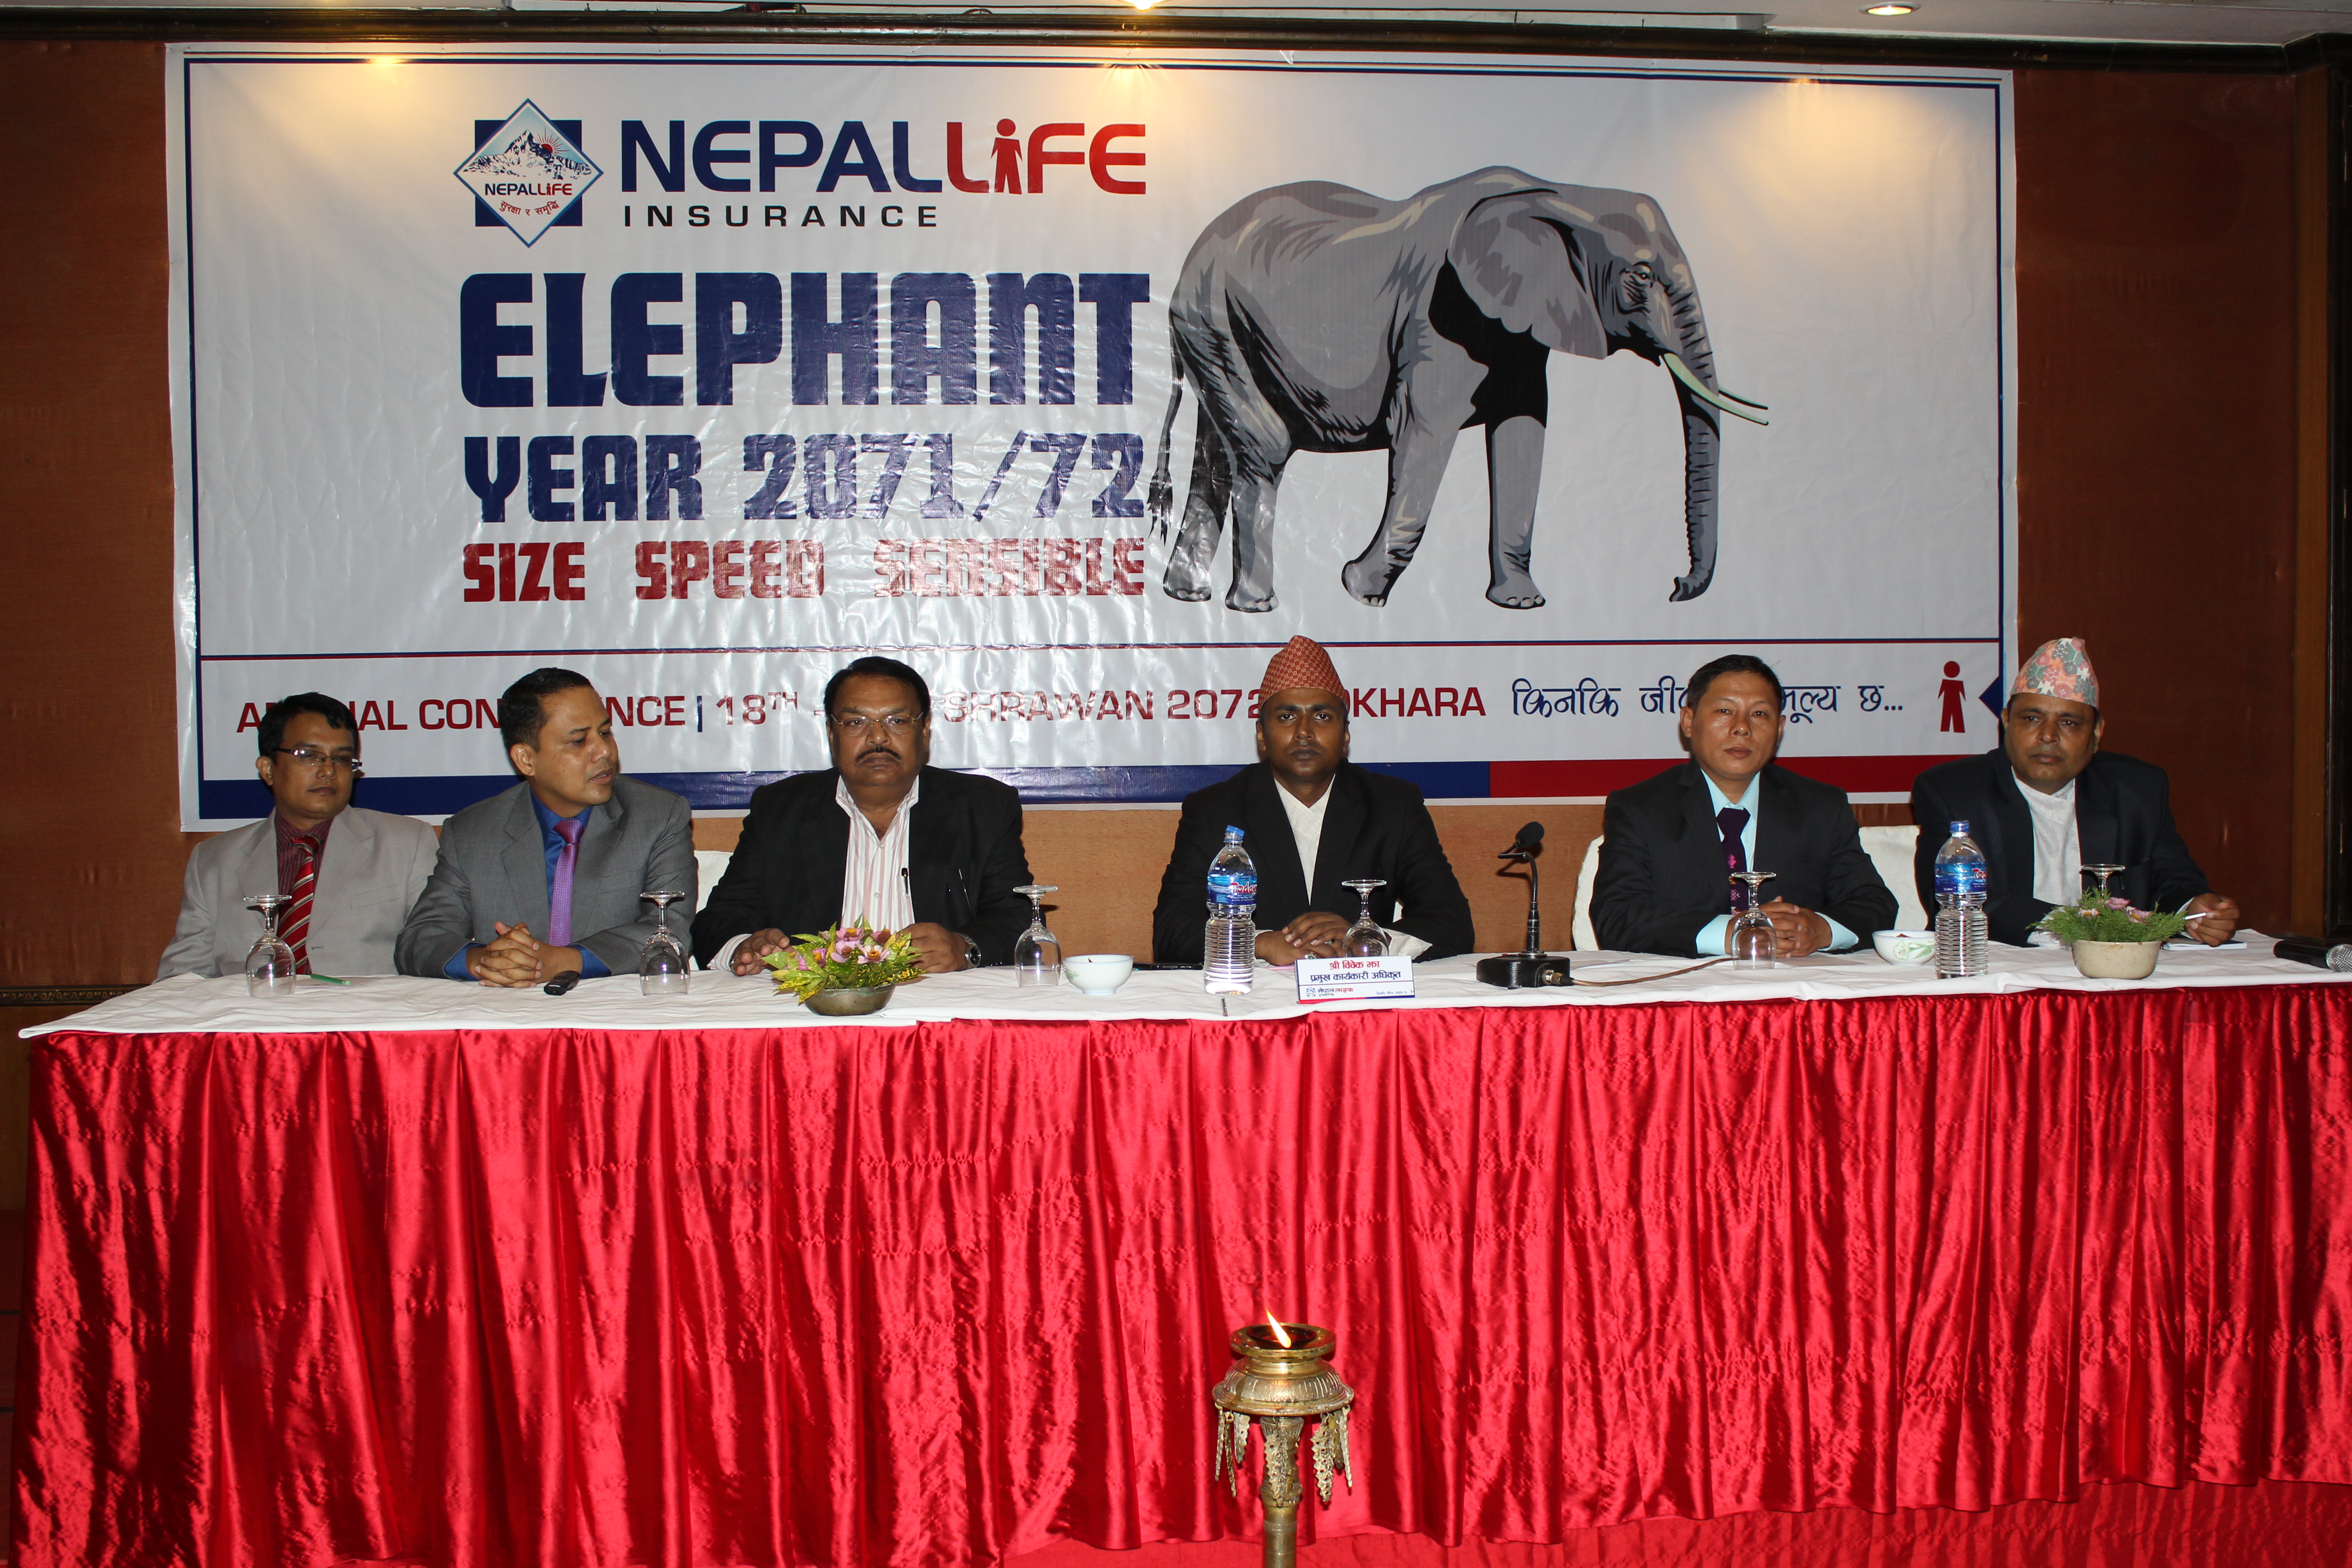 Annual Conference - Elephant Year 2071-72